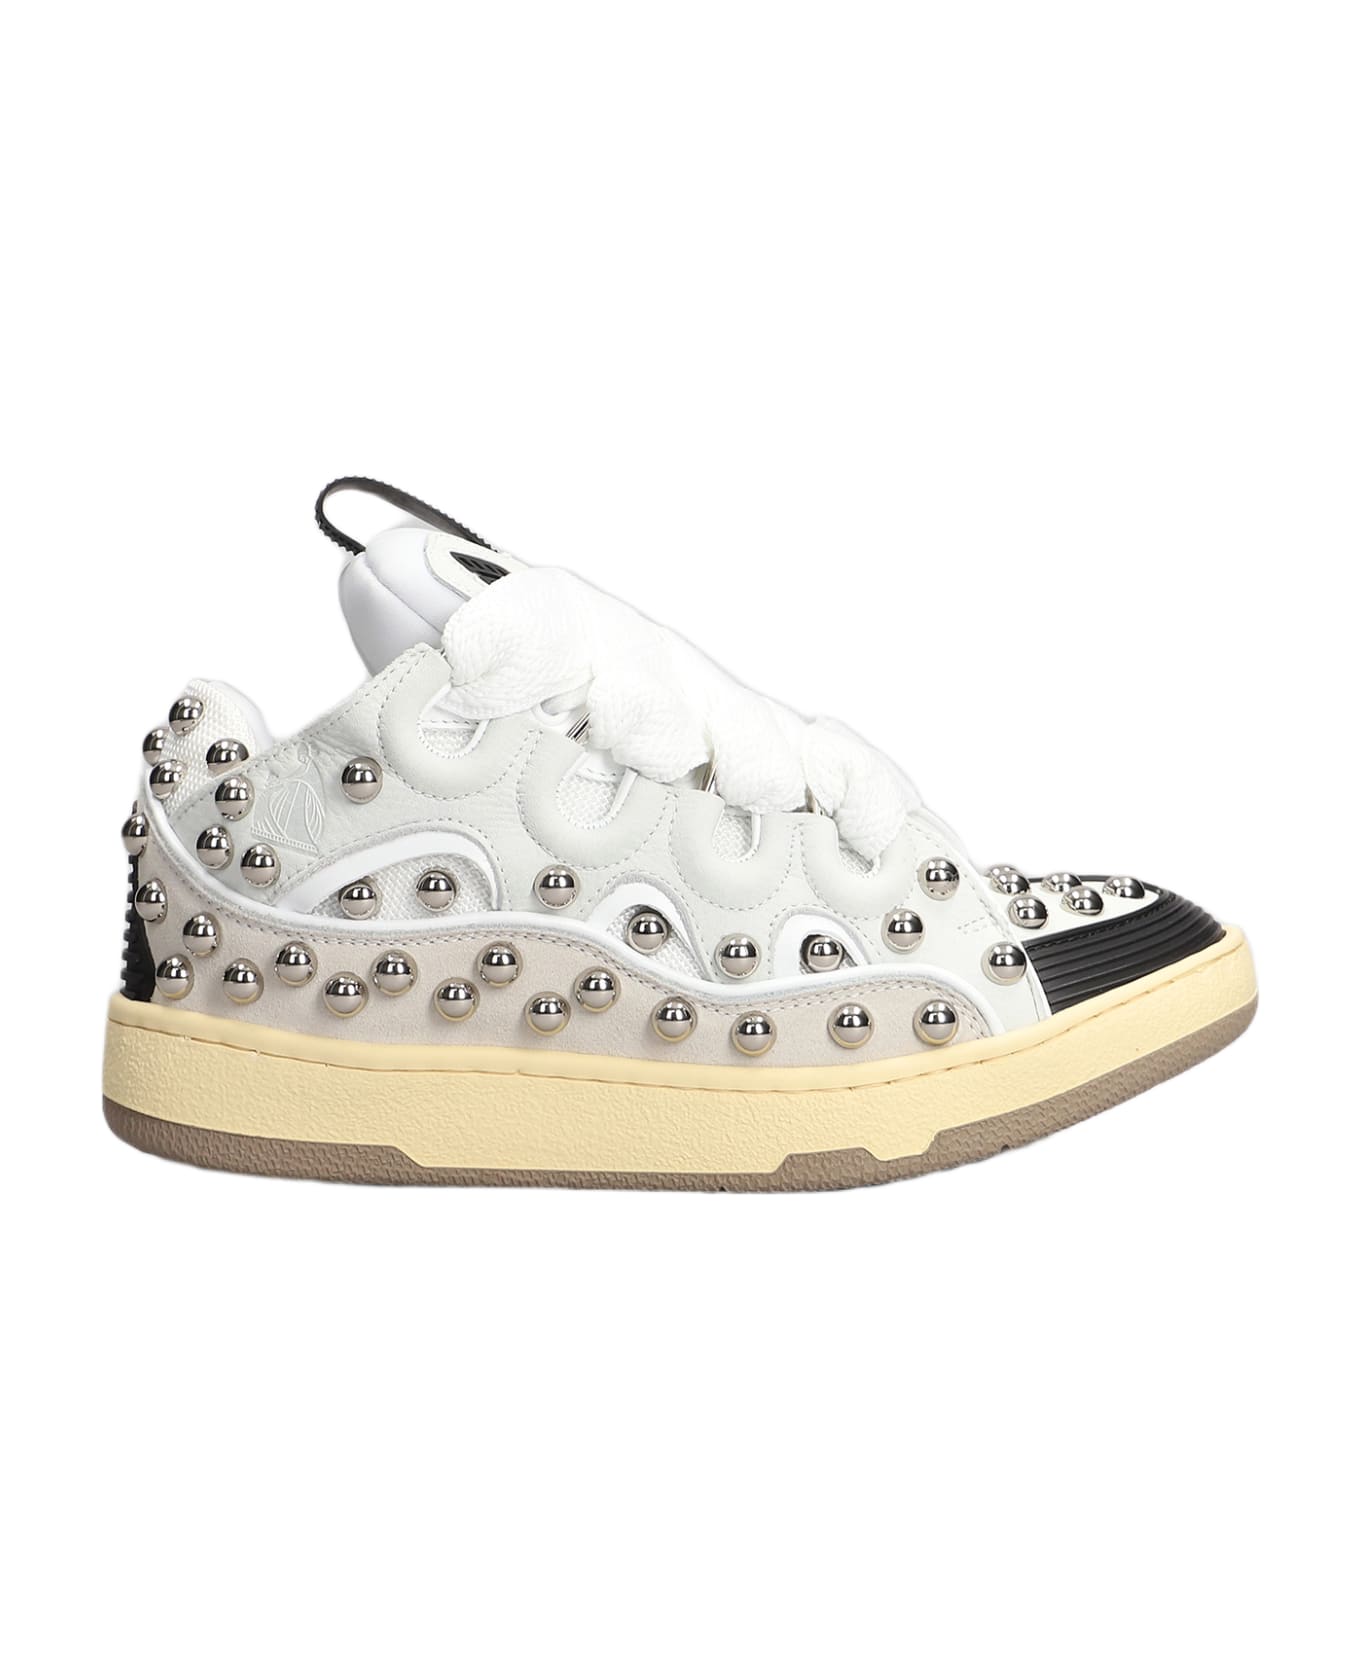 Lanvin Curb Sneakers In White Leather - White